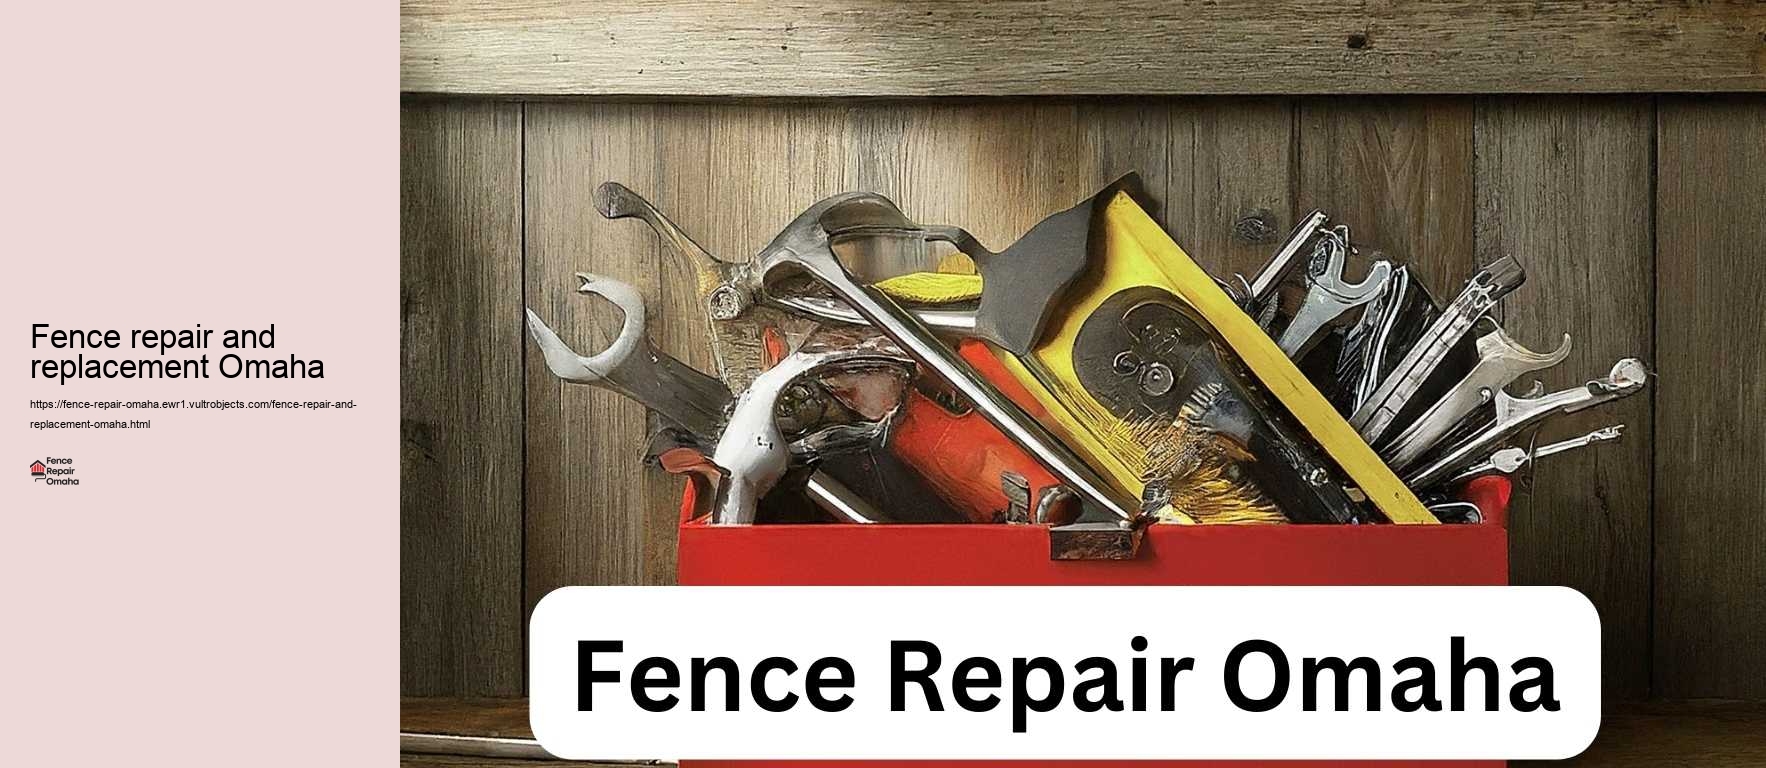 Fence repair and replacement Omaha